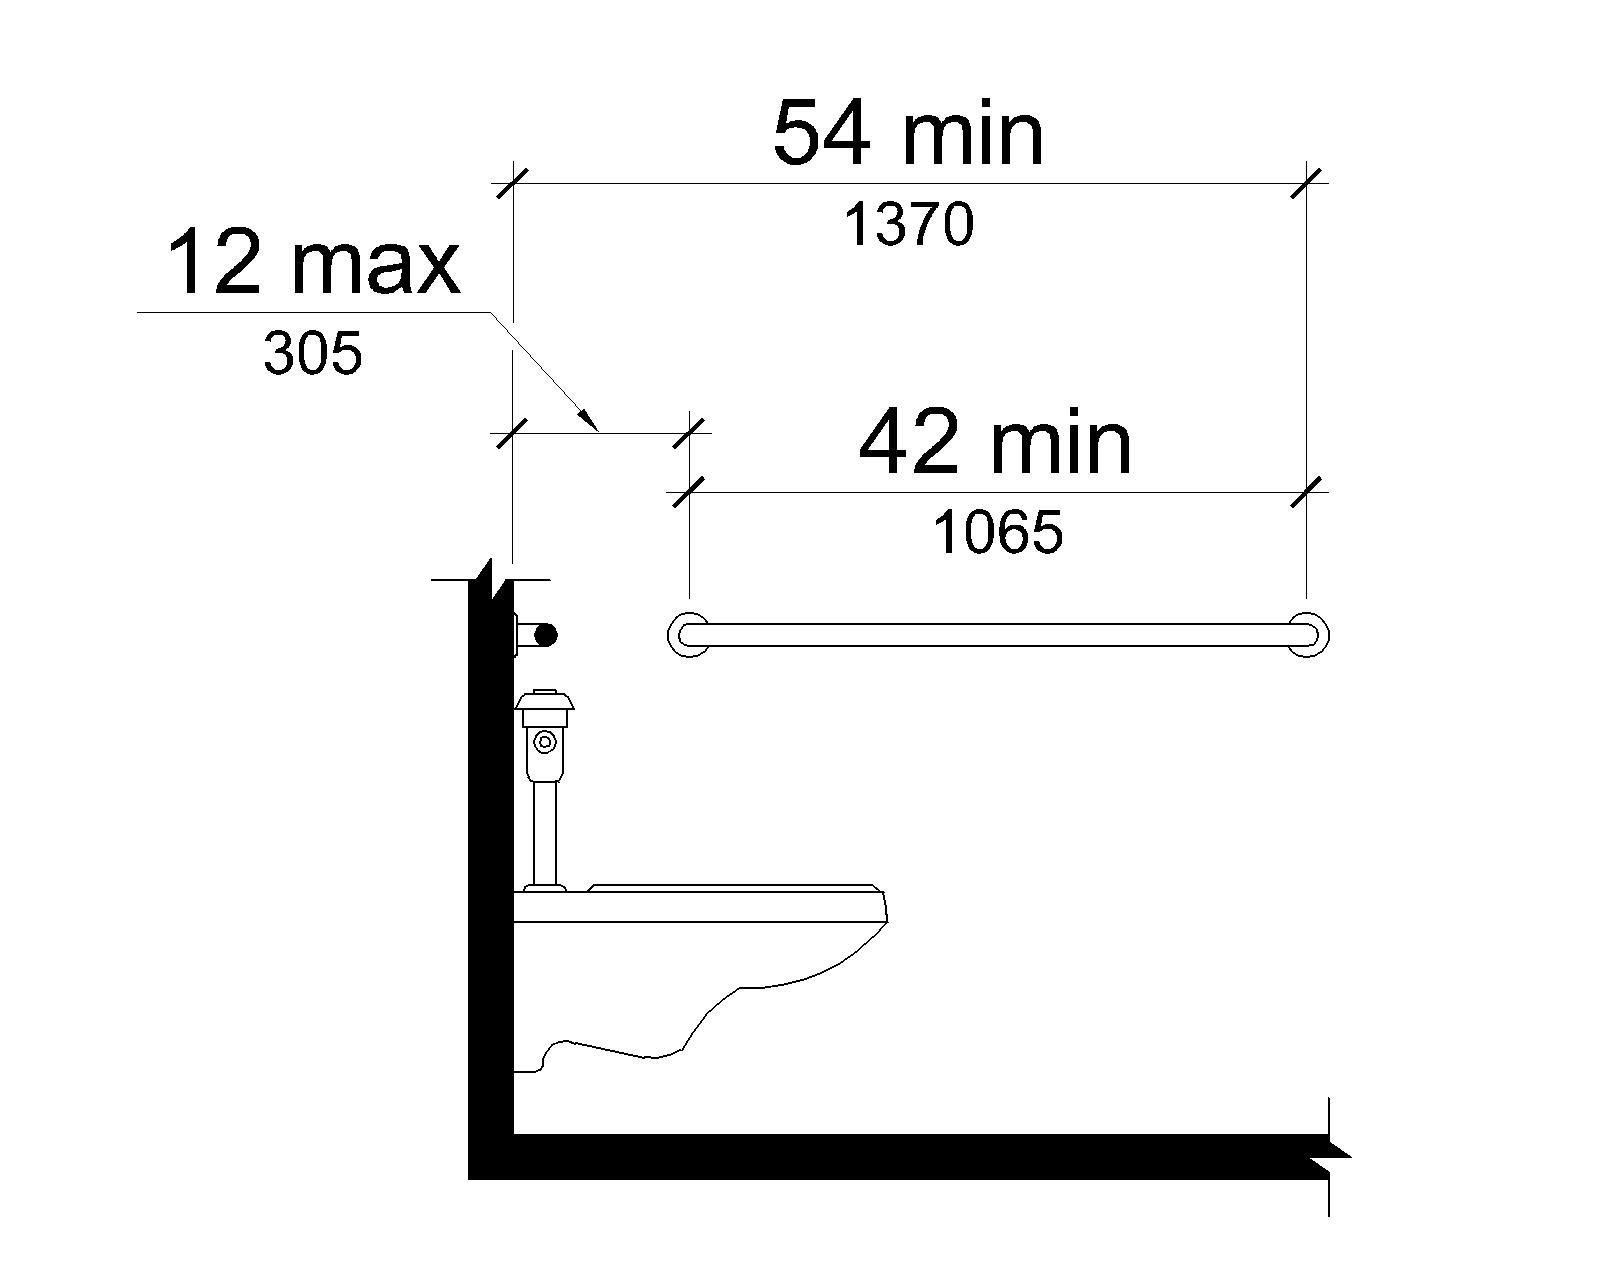 Elevation drawing shows the side wall grab bar to be 42 inches (1065) long minimum, located 12 inches (305 mm) maximum from the rear wall and extending 54 inches (1370 mm) minimum from the rear wall.